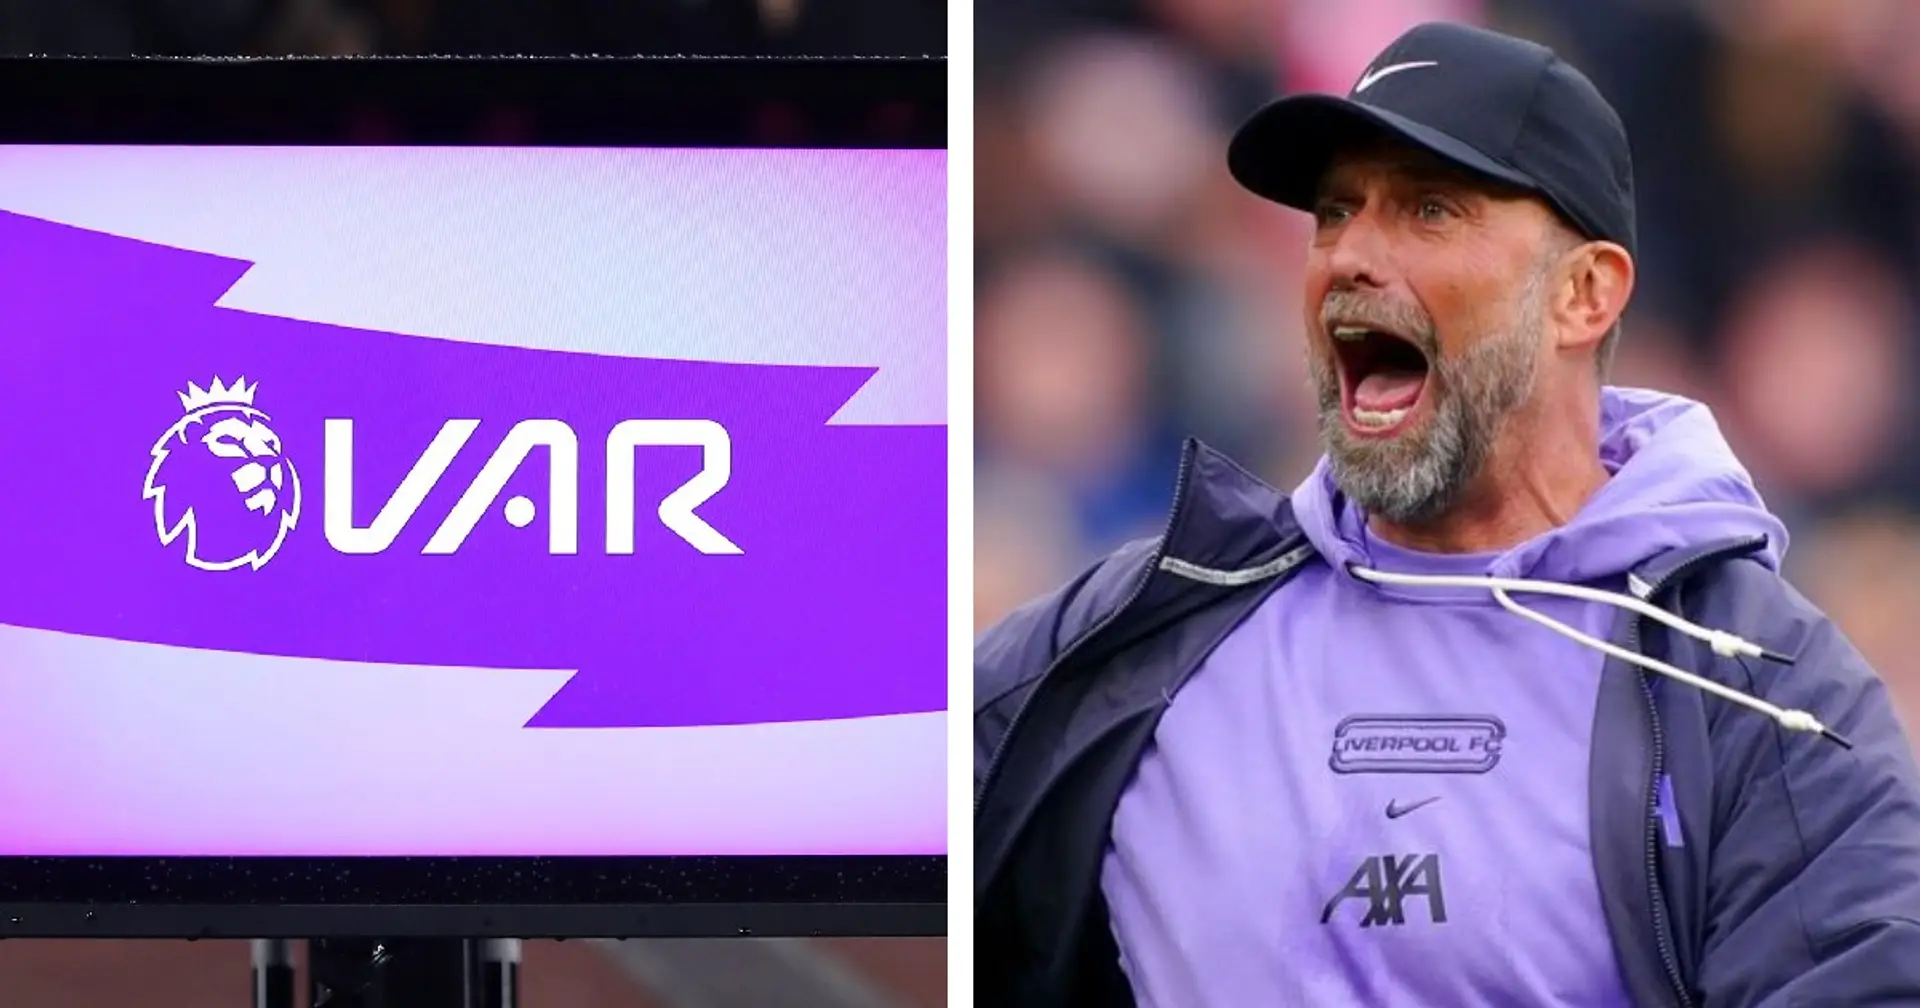 Do you want VAR to be binned? 